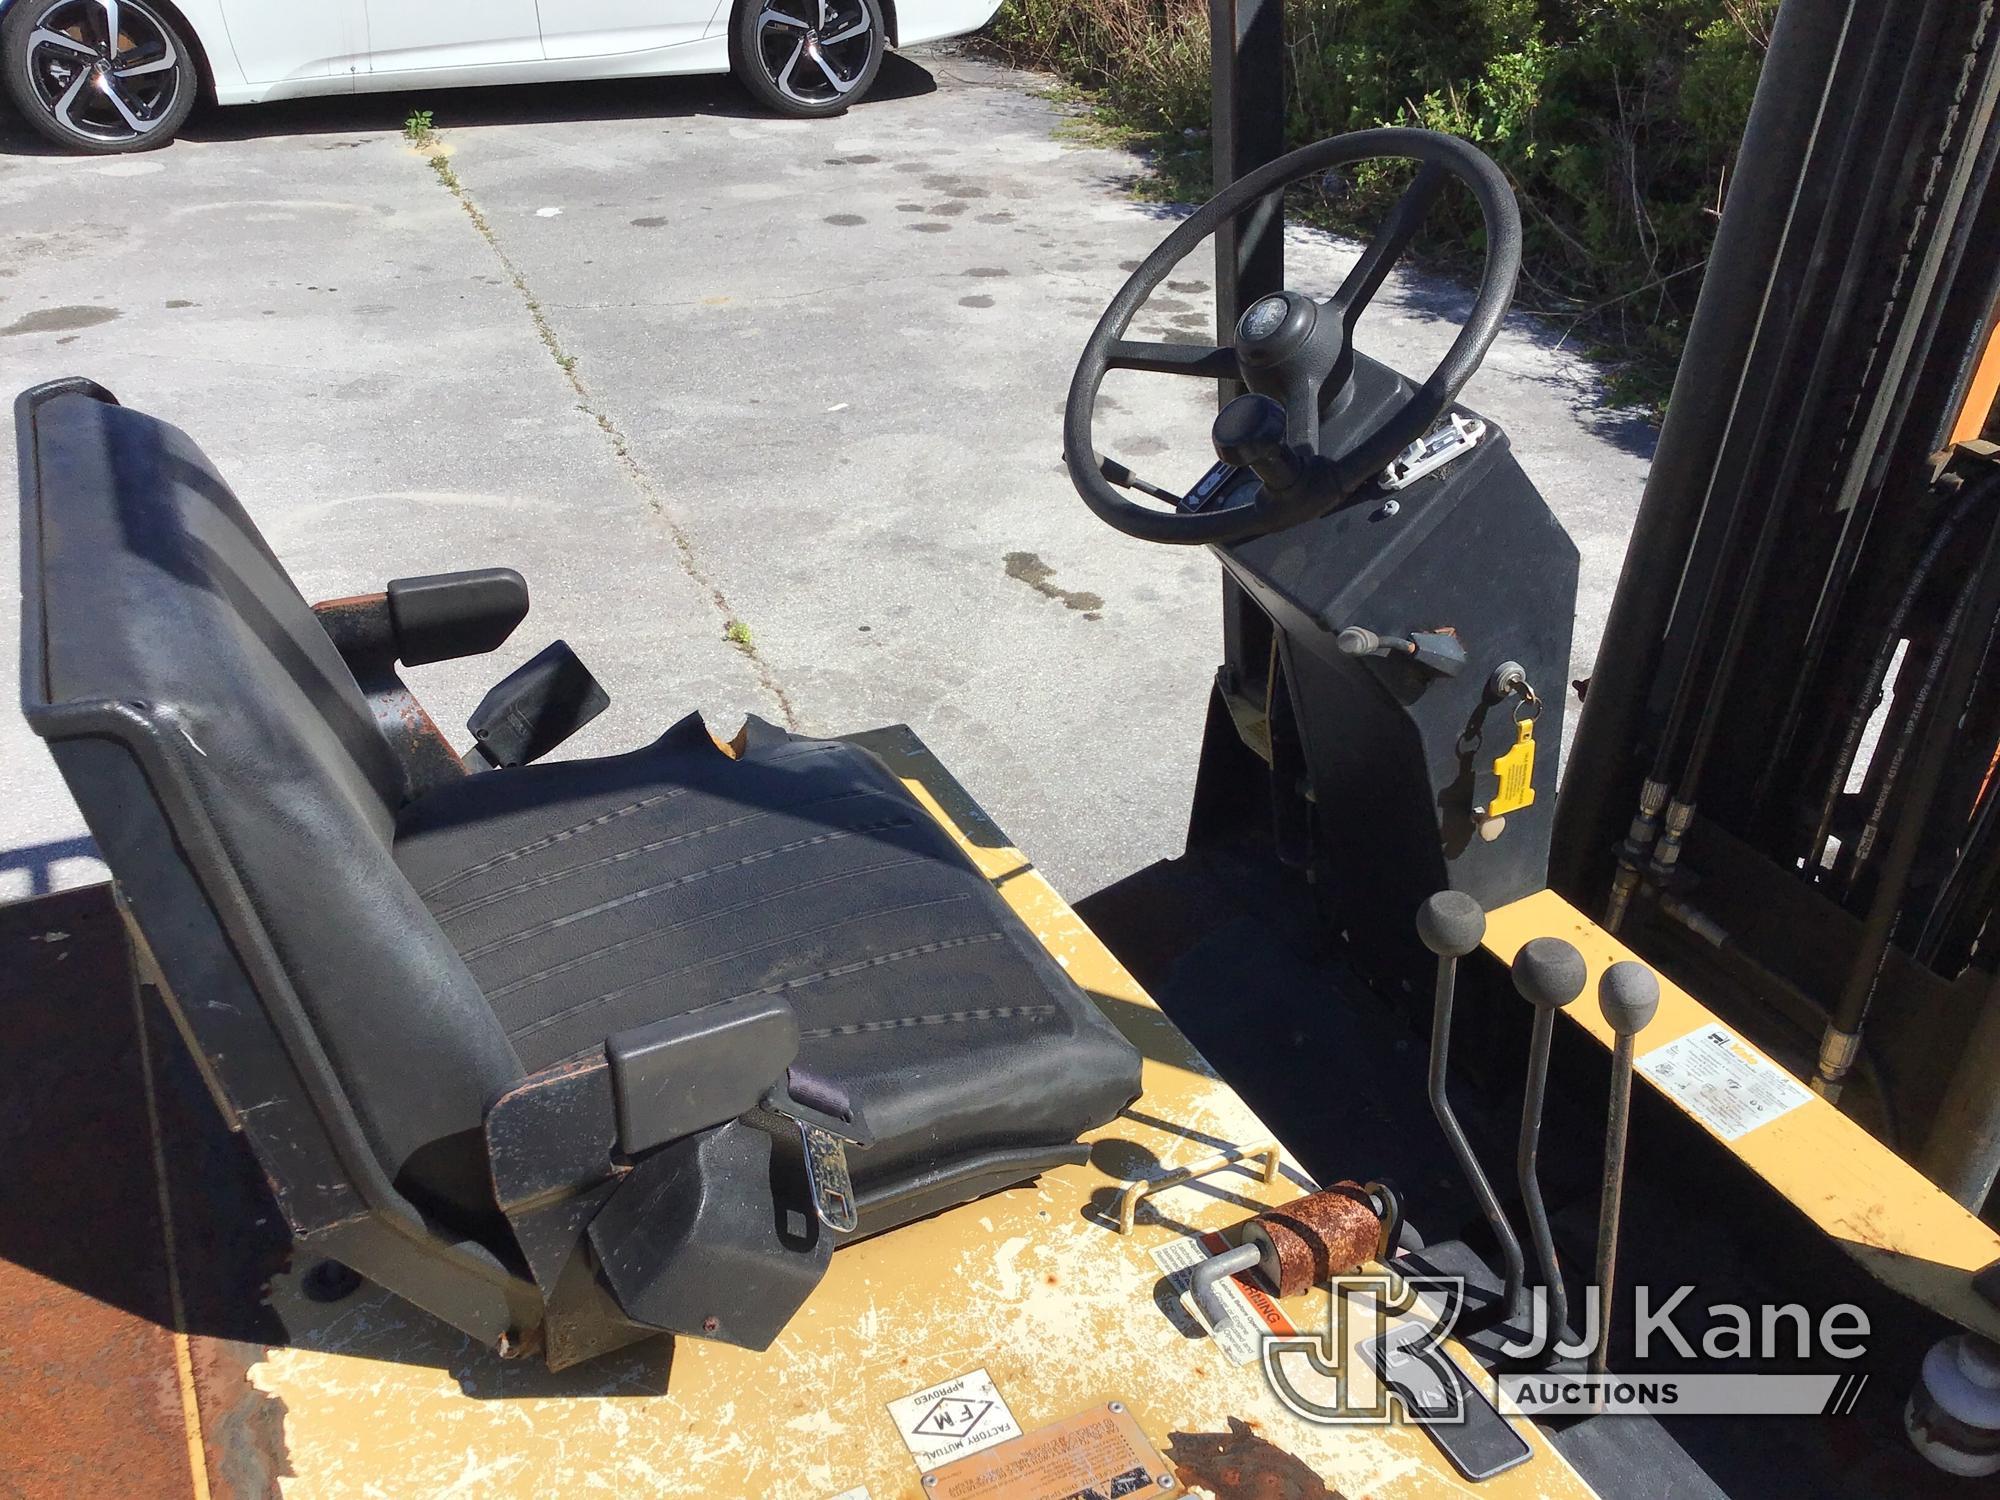 (Ocala, FL) 1993 Yale Forklift 3-Wheel Solid Tired Forklift Not Running, Condition Unknown)